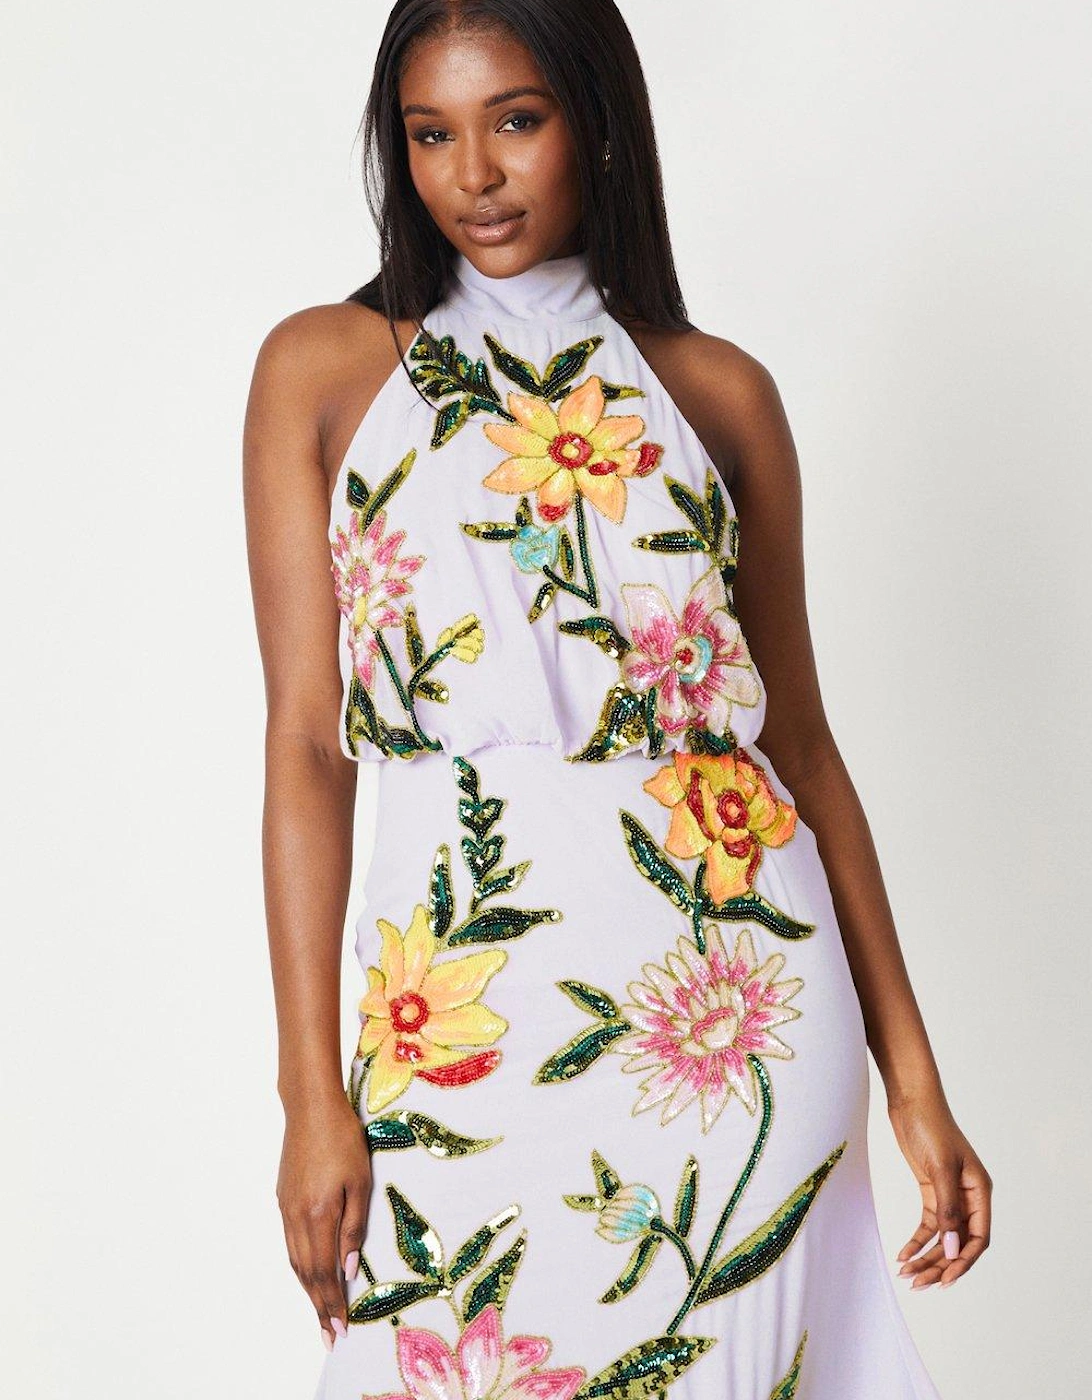 High Neck Midi Dress With Floral Embellishment